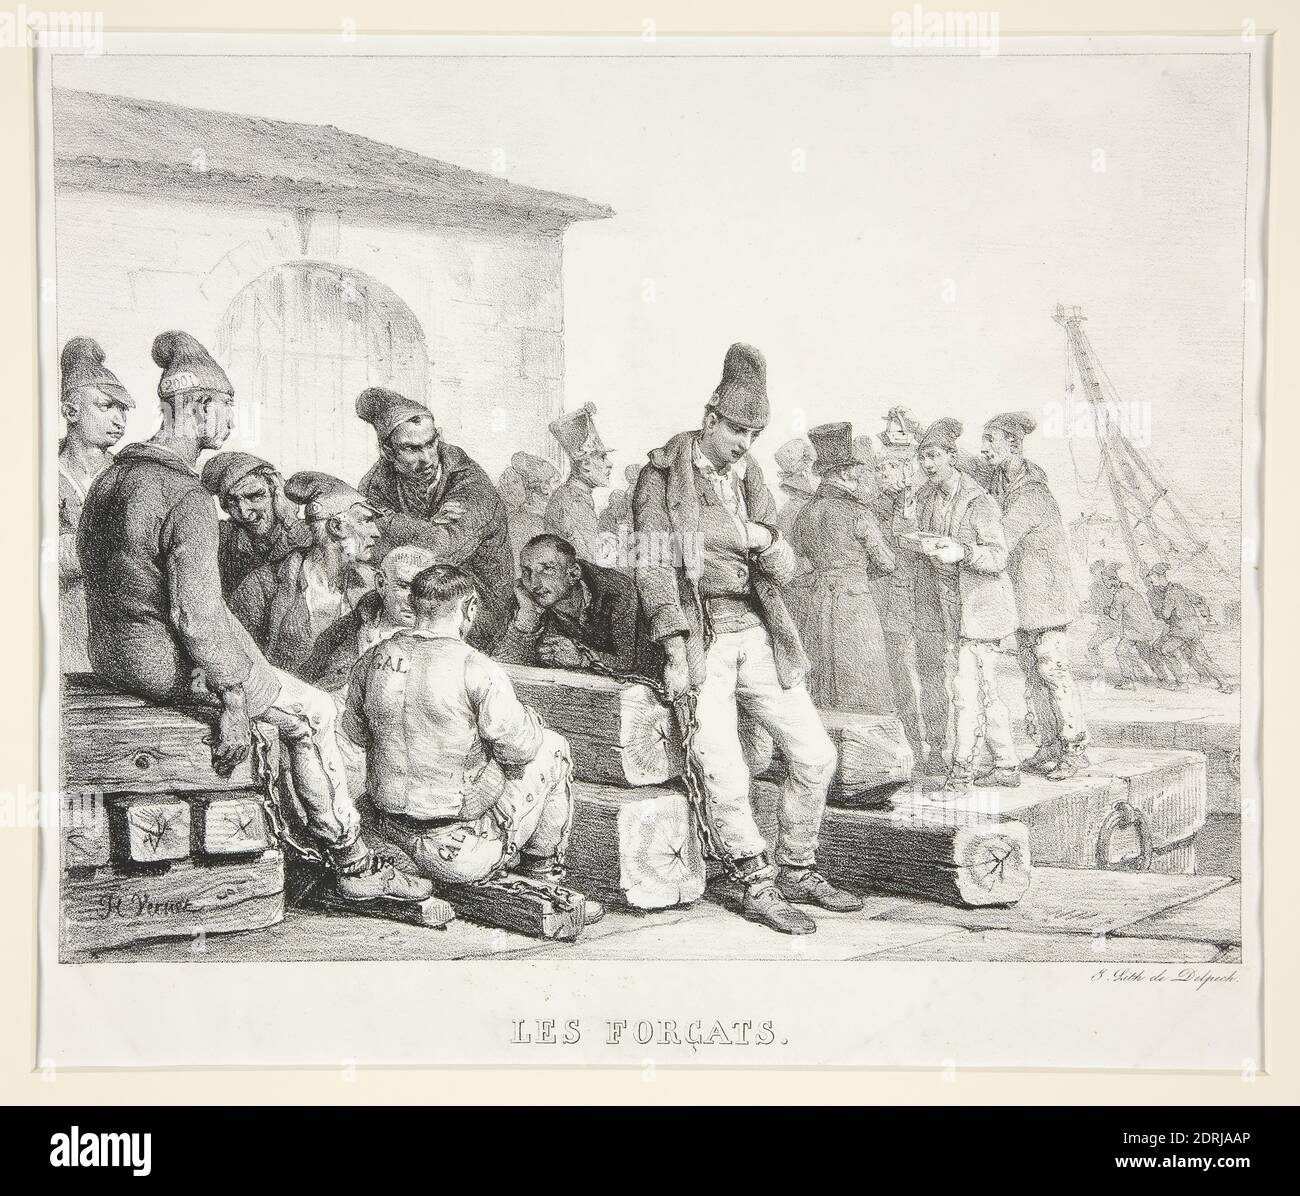 Lithographer: François-Séraphin Delpech, French, 1778–1825, After: Horace Vernet, French, 1789–1863, Les Forçats (The Prisoners), Lithograph, Image: 23 × 30.2 cm (9 1/16 × 11 7/8in.), French, 19th century, Works on Paper - Prints Stock Photo